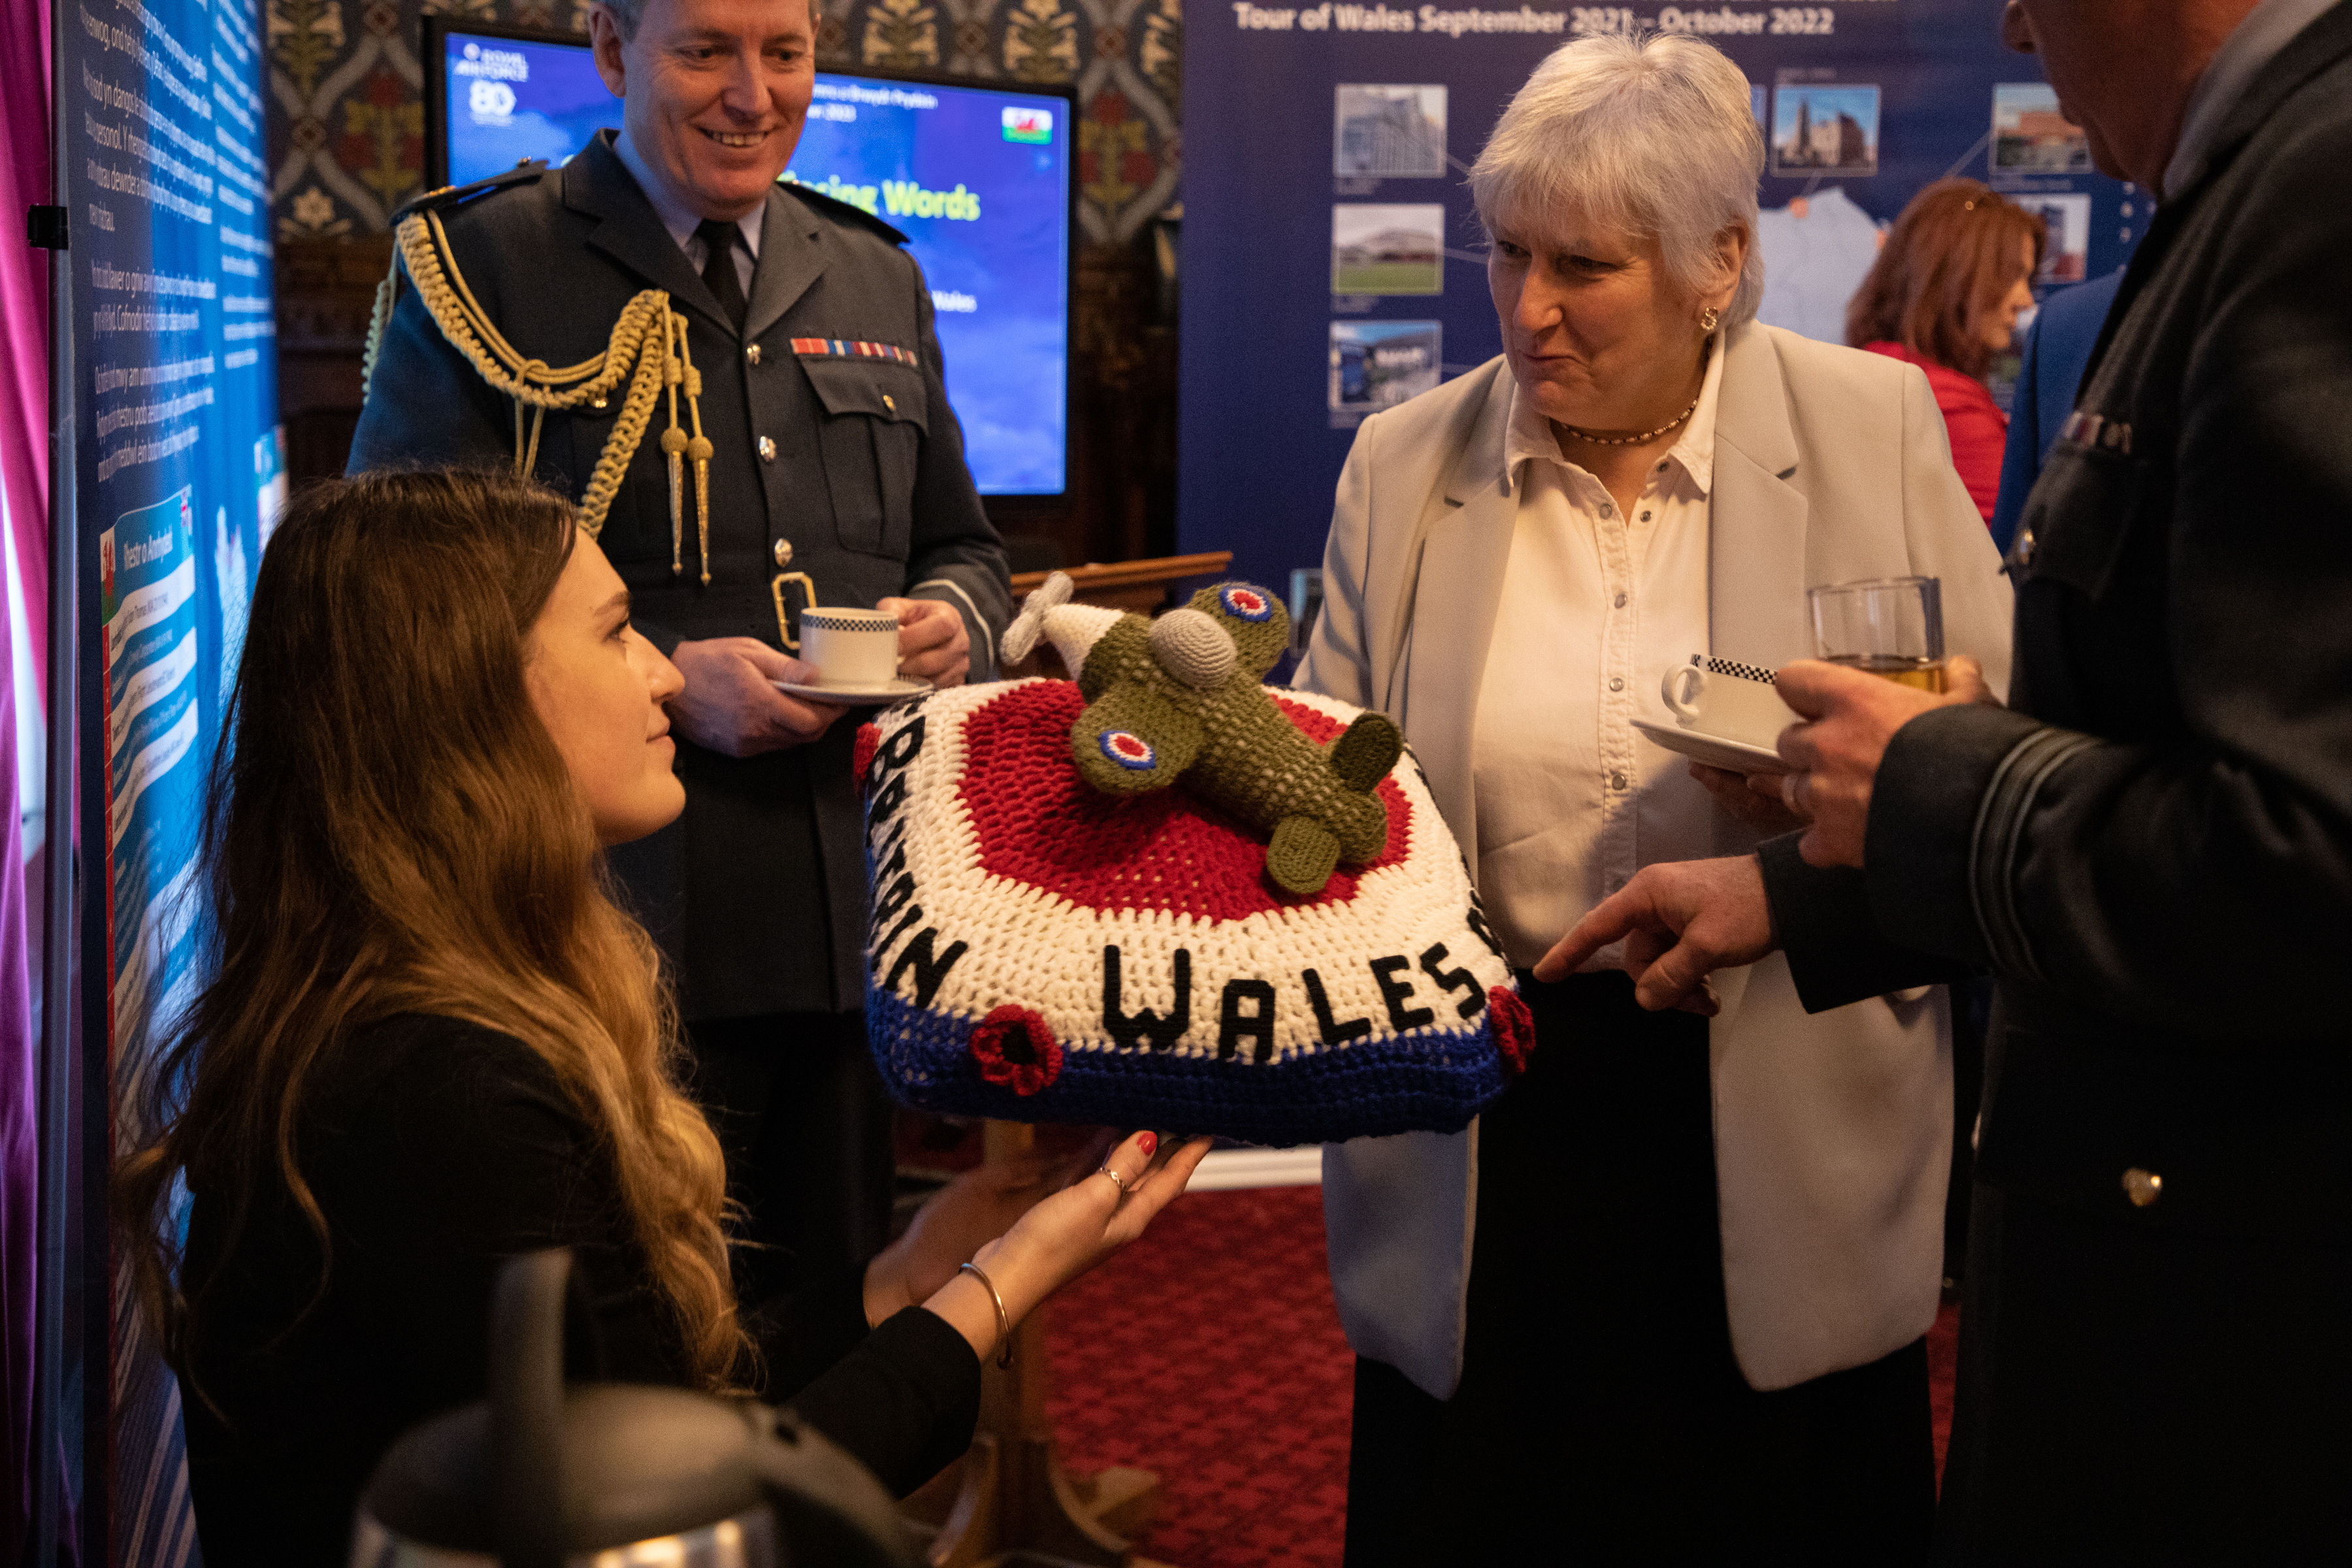 Image shows RAF aviator and civilians holding a crocheted Spitfire model at the exhibition.